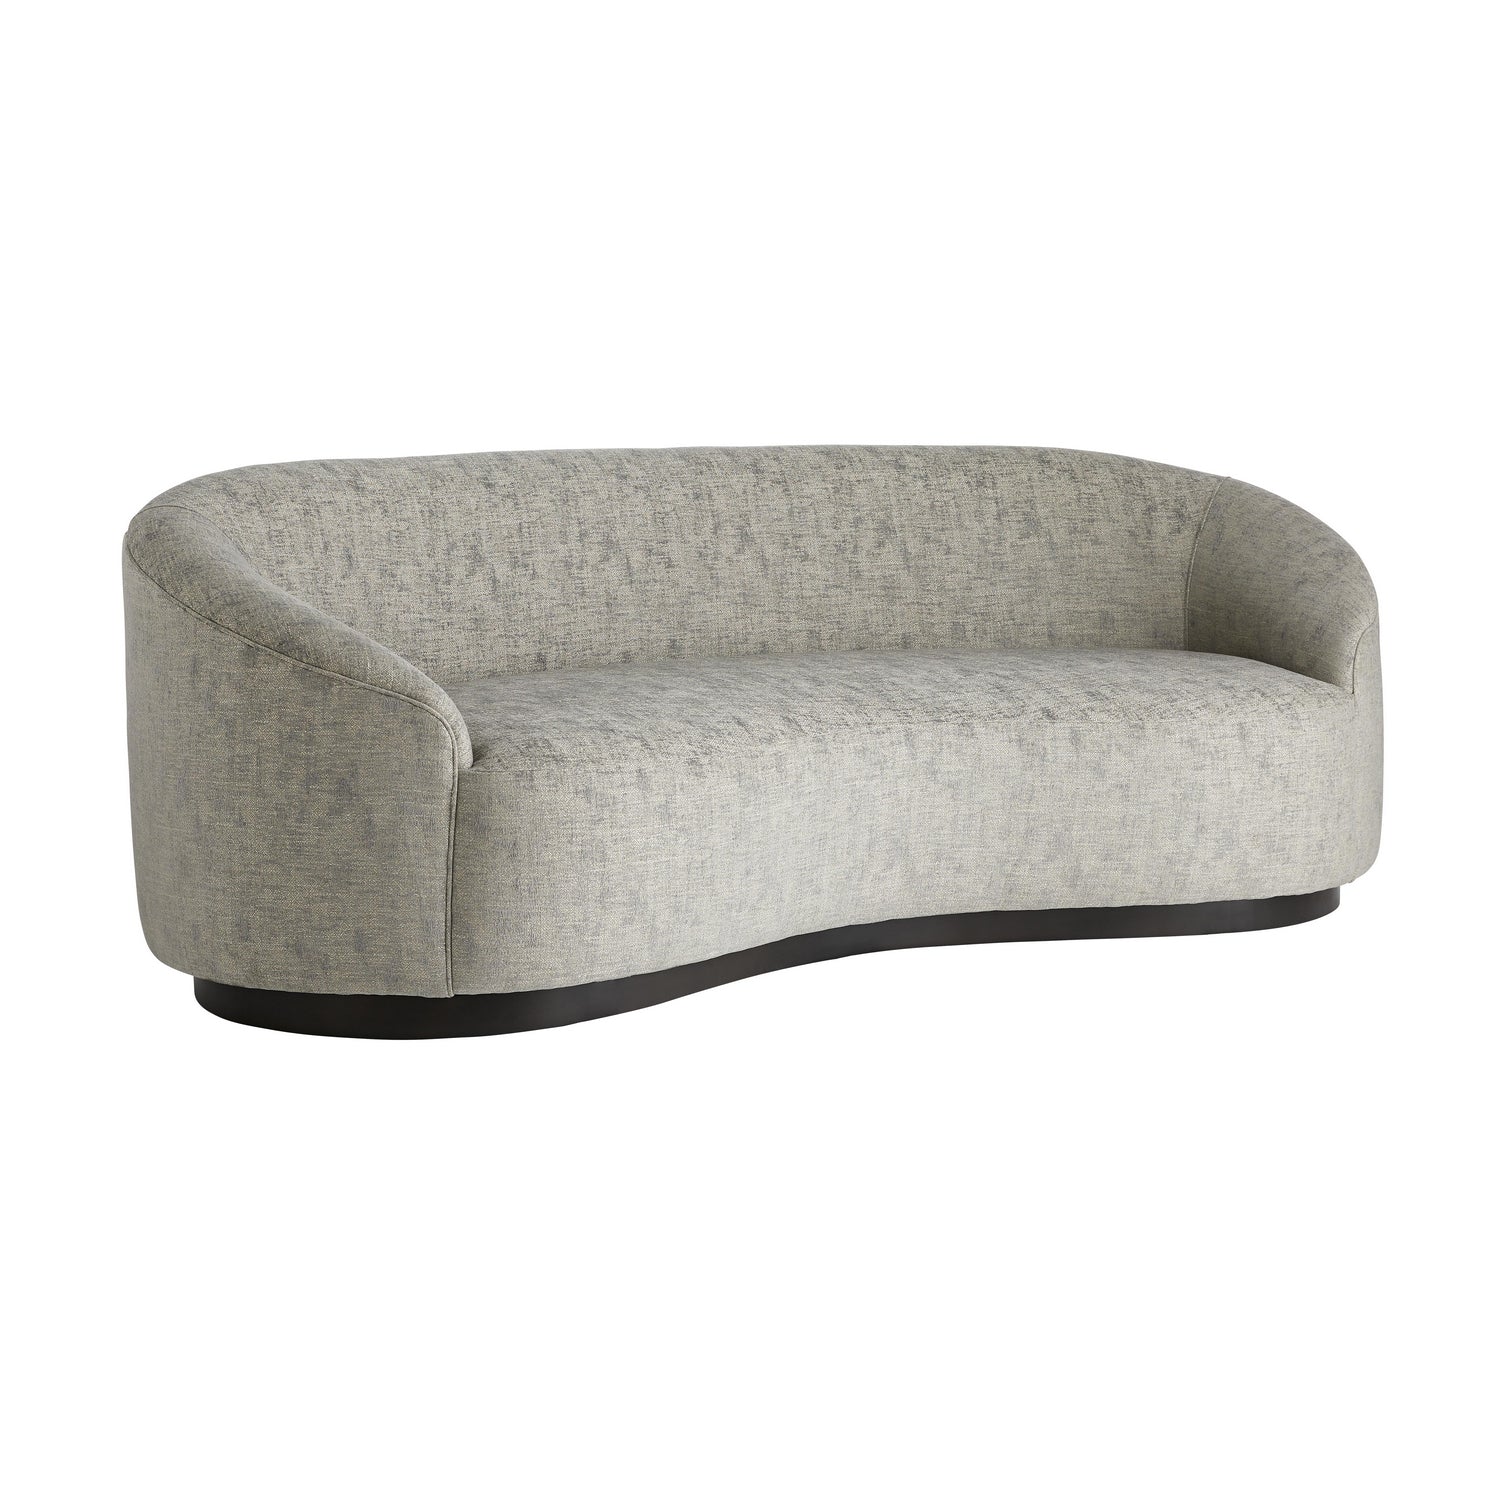 Sofa from the Turner collection in Oyster Jacquard finish